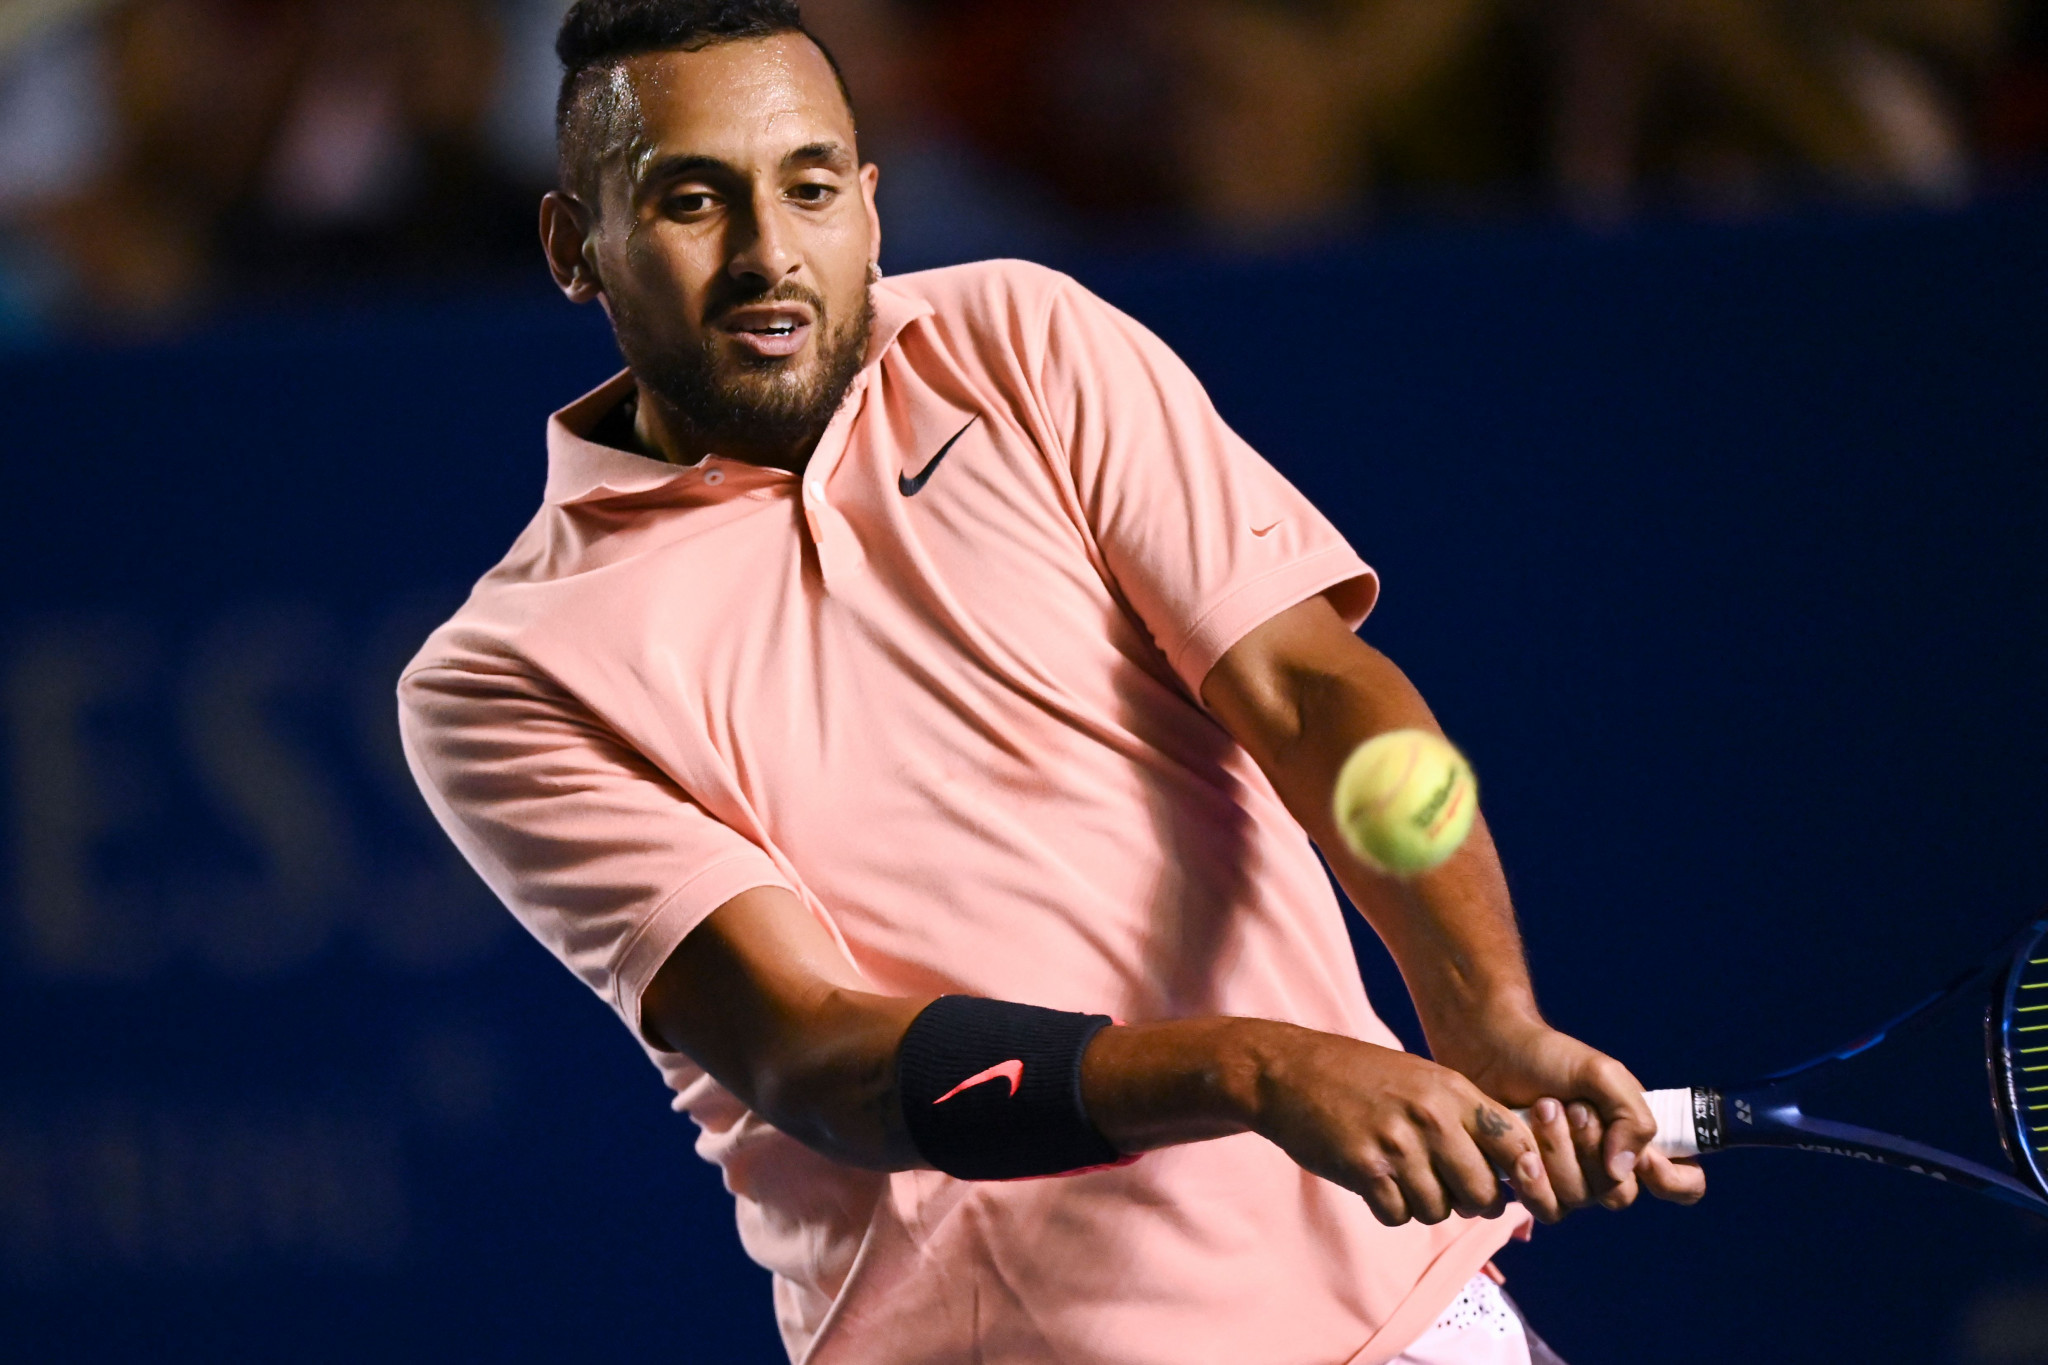 Nick Kyrgios has traded insults with Karen Khachanov on Twitter ©Getty Images